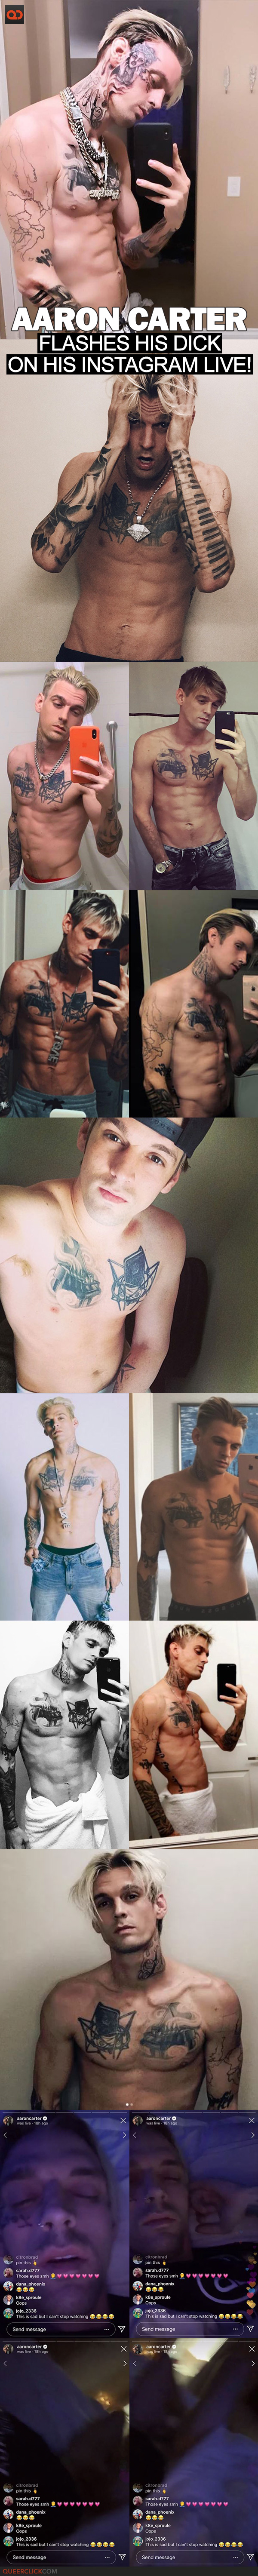 Aaron Carter Flashes His Penis In Boxers On His Live.